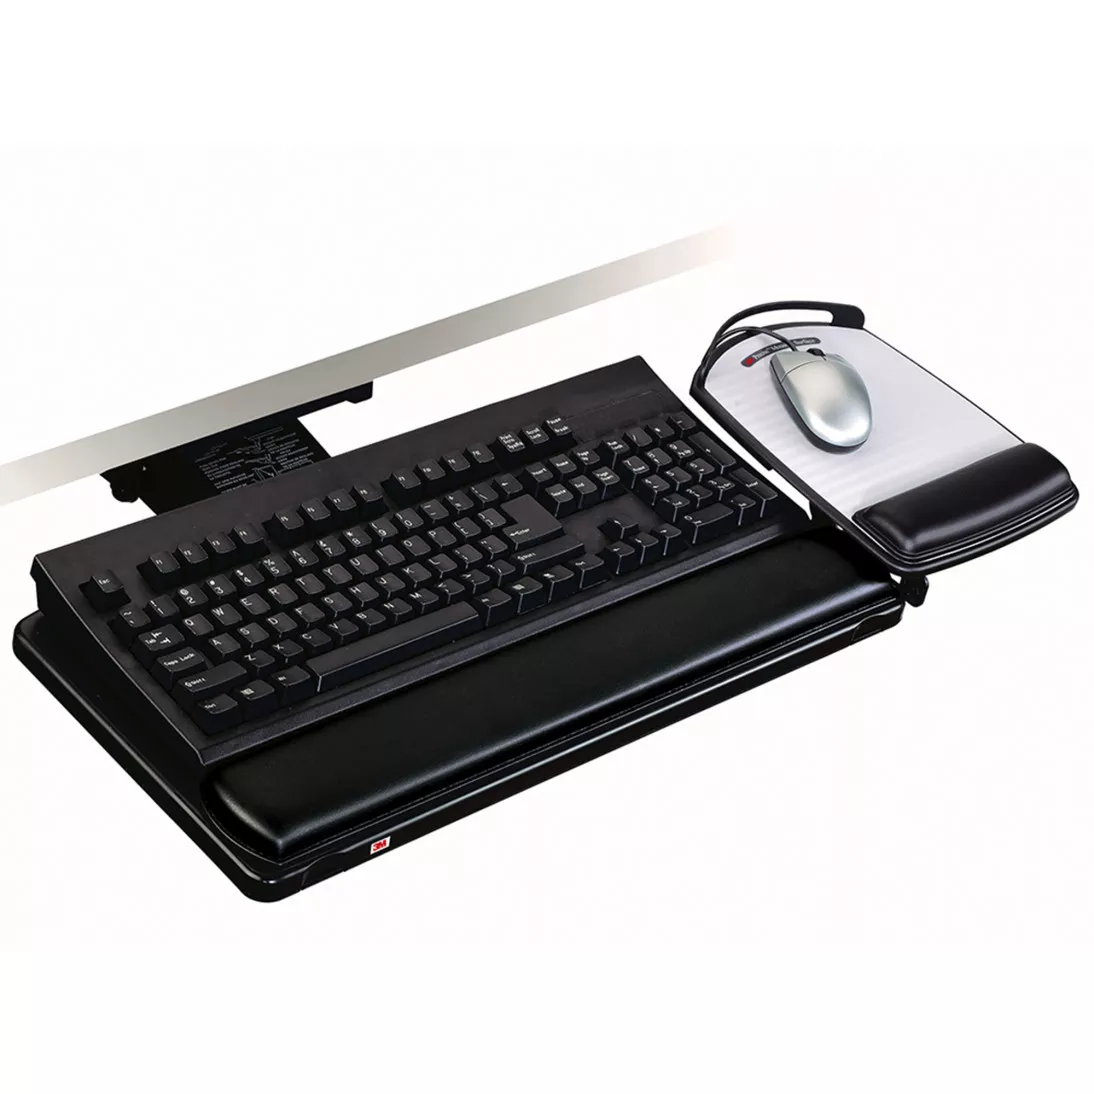 3M™ Knob Adjust Keyboard Tray with Adjustable Keyboard and Mouse
Platform, 17.75 in Track, AKT80LE